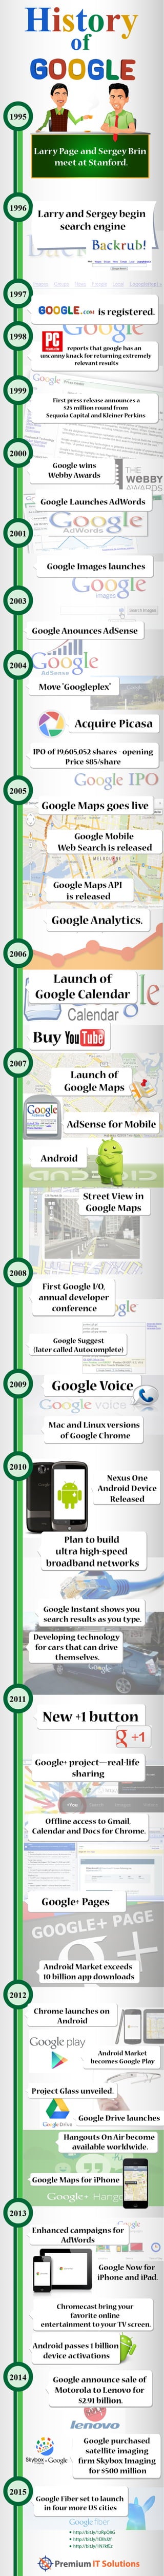 History of Google Infographic